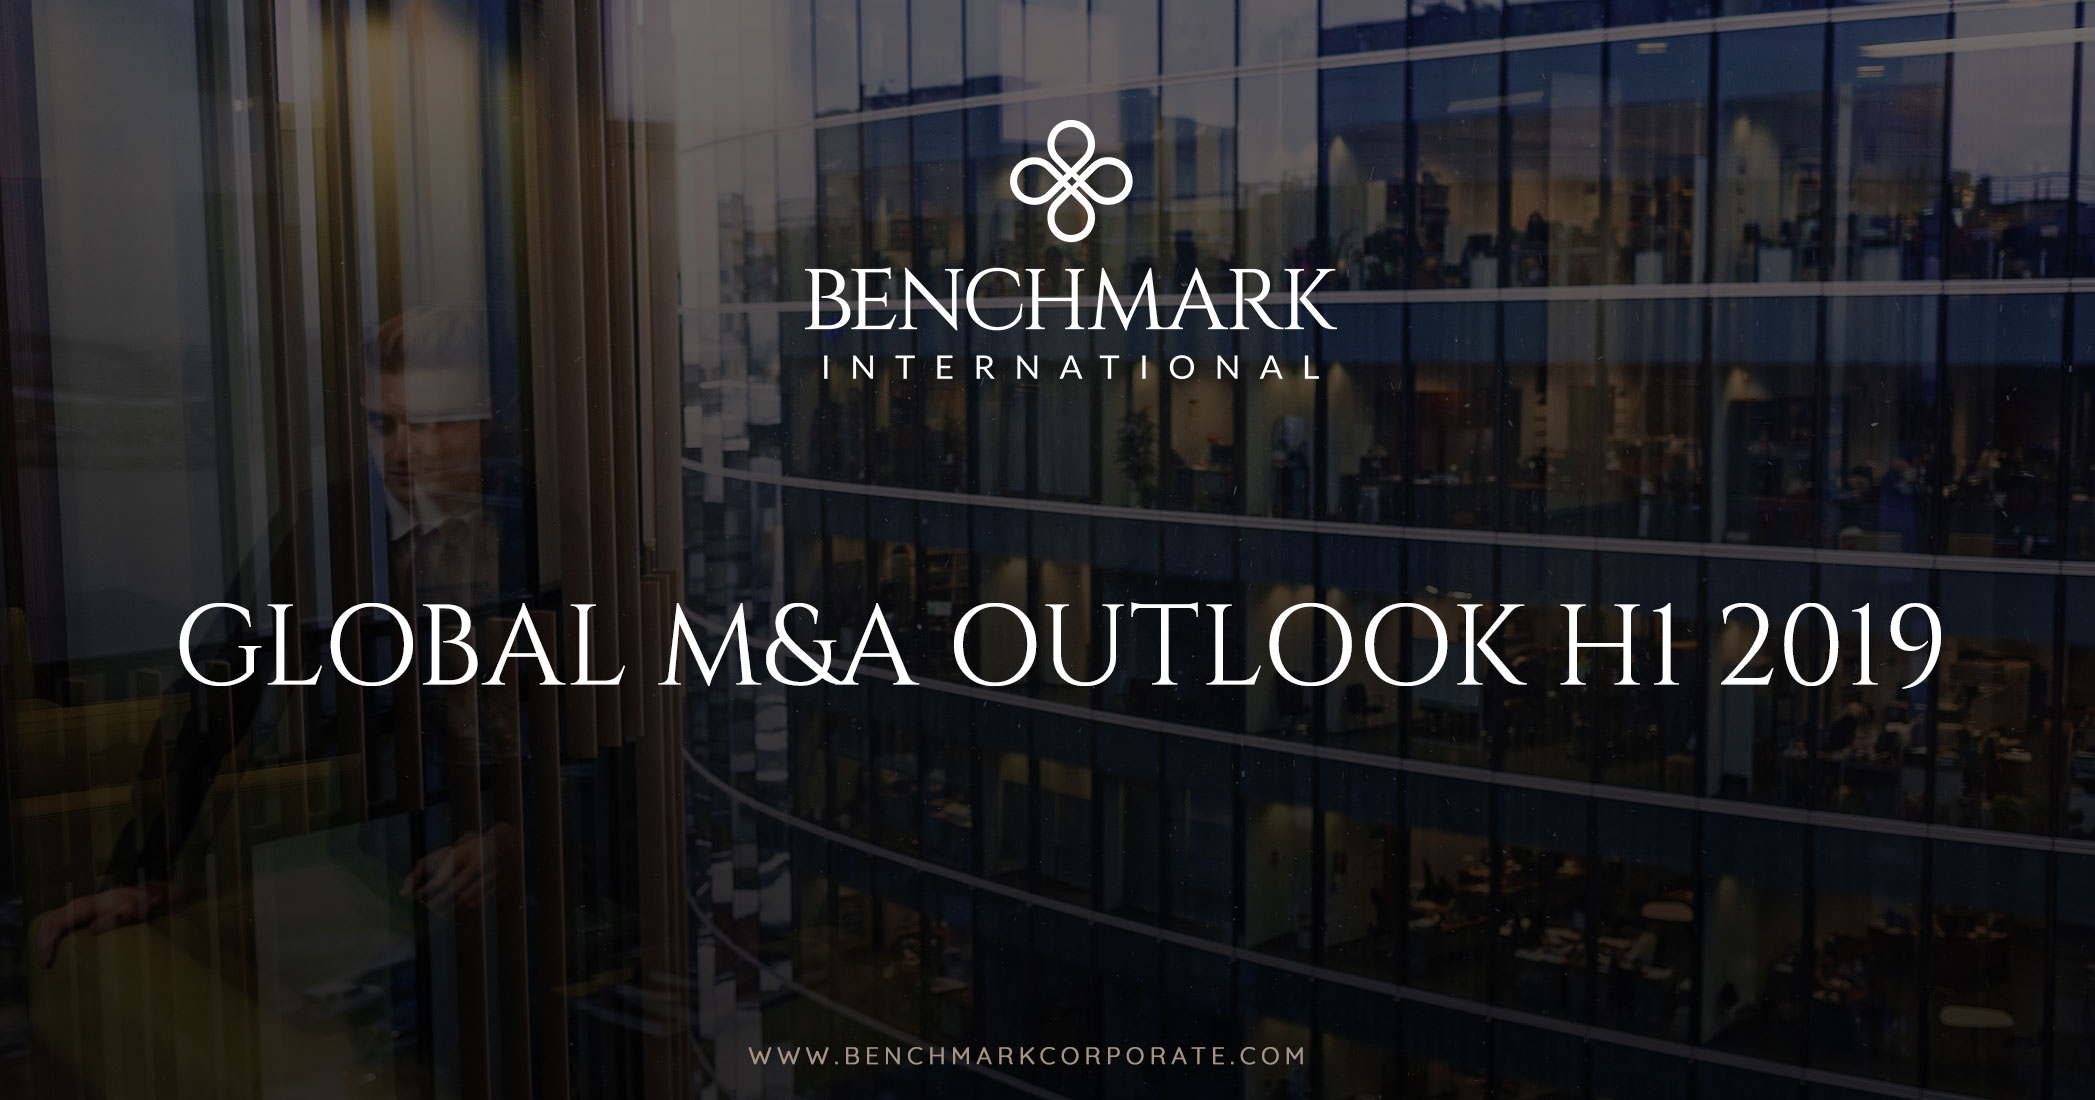 Global M&A Outlook H1 2019